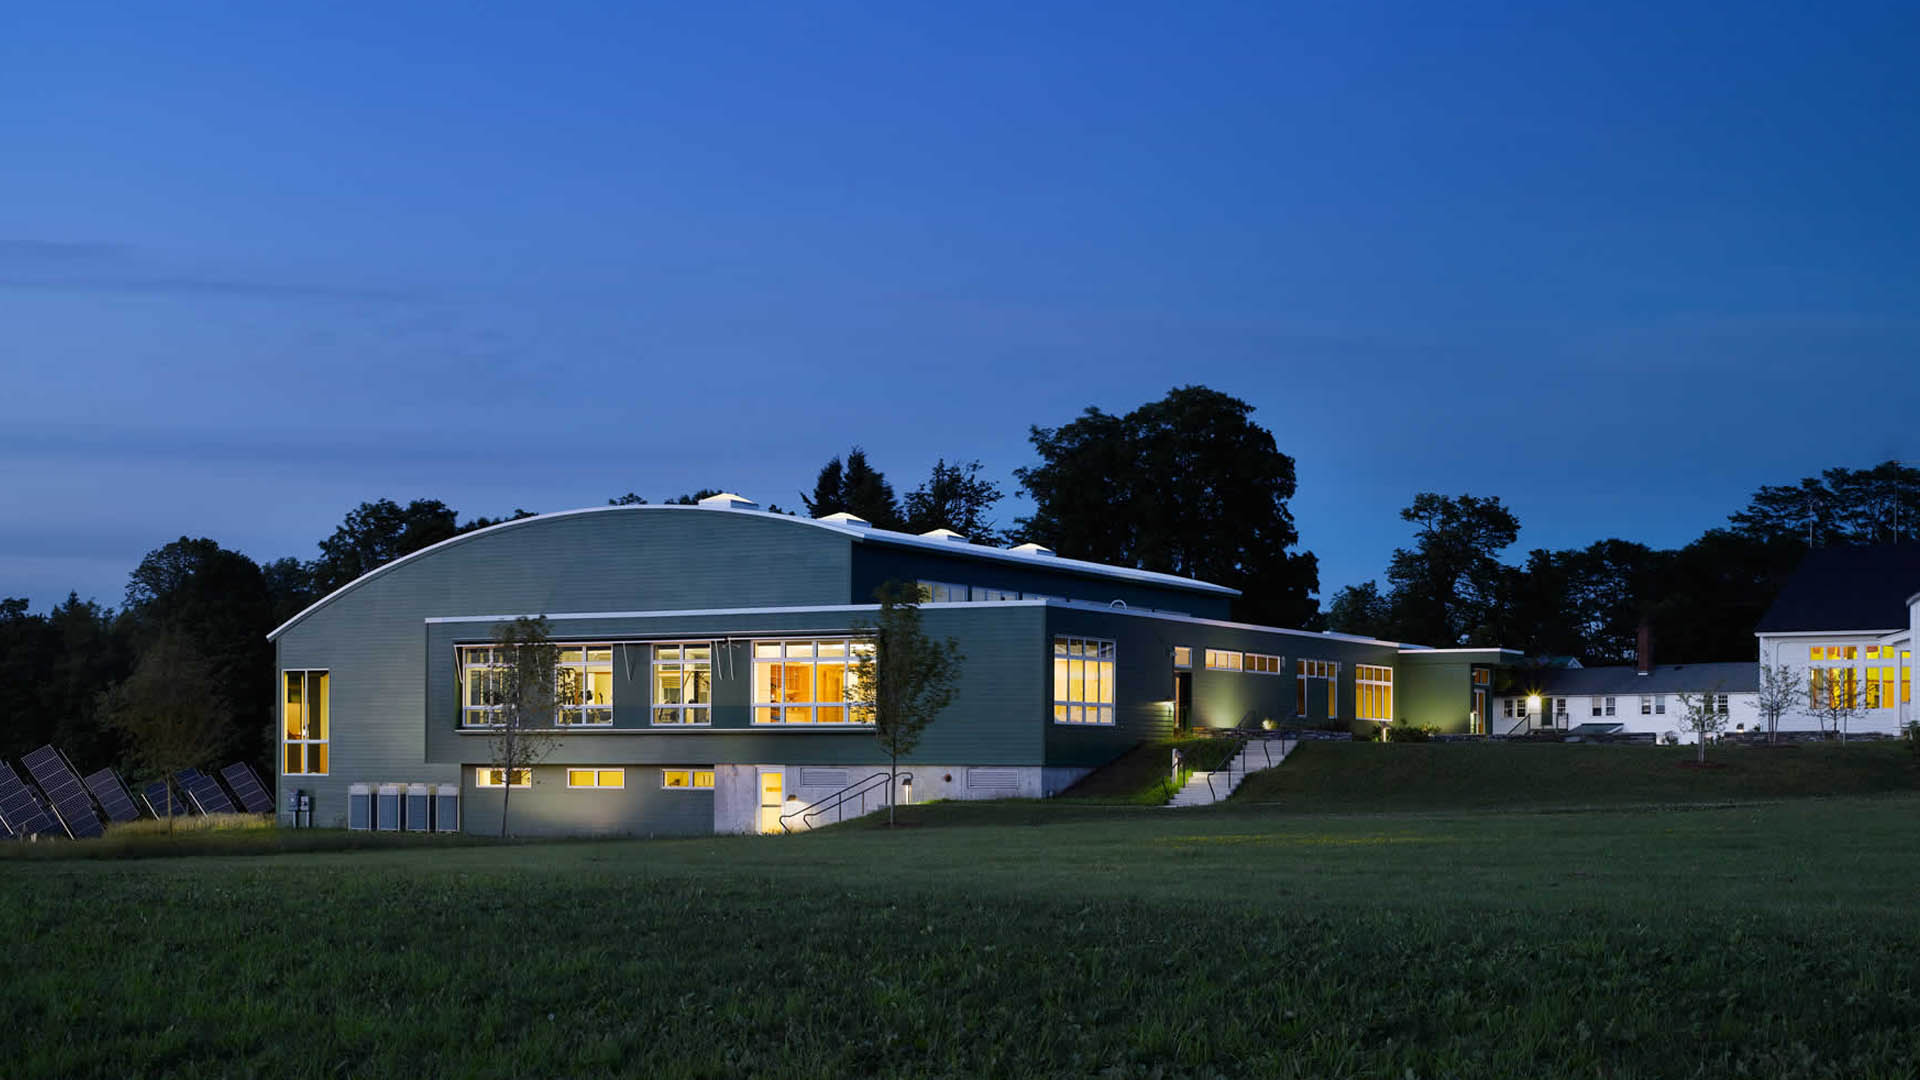 Architecture and design of The Putney School Field House - Putney, Vermont